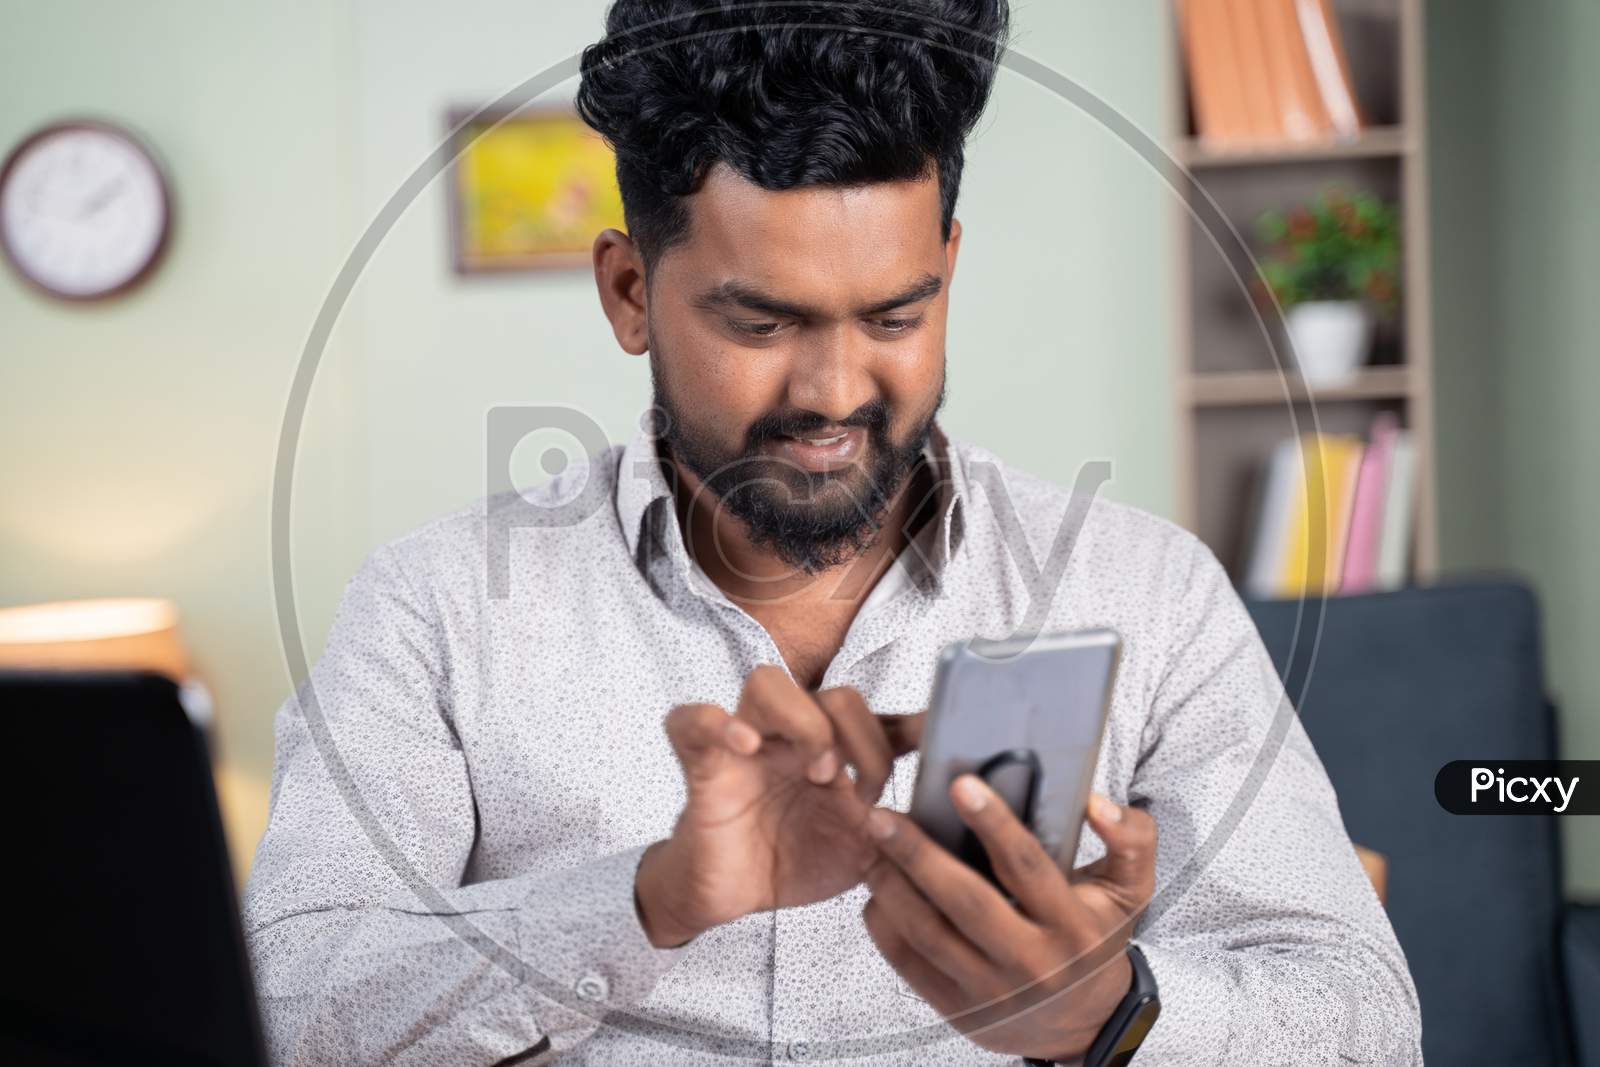 Young Man Smiling By Reading Funny Message Or Sms On Mobile Phone At Office - Concept Of Using Social Media, Internet And Entertainment Lifestyle.